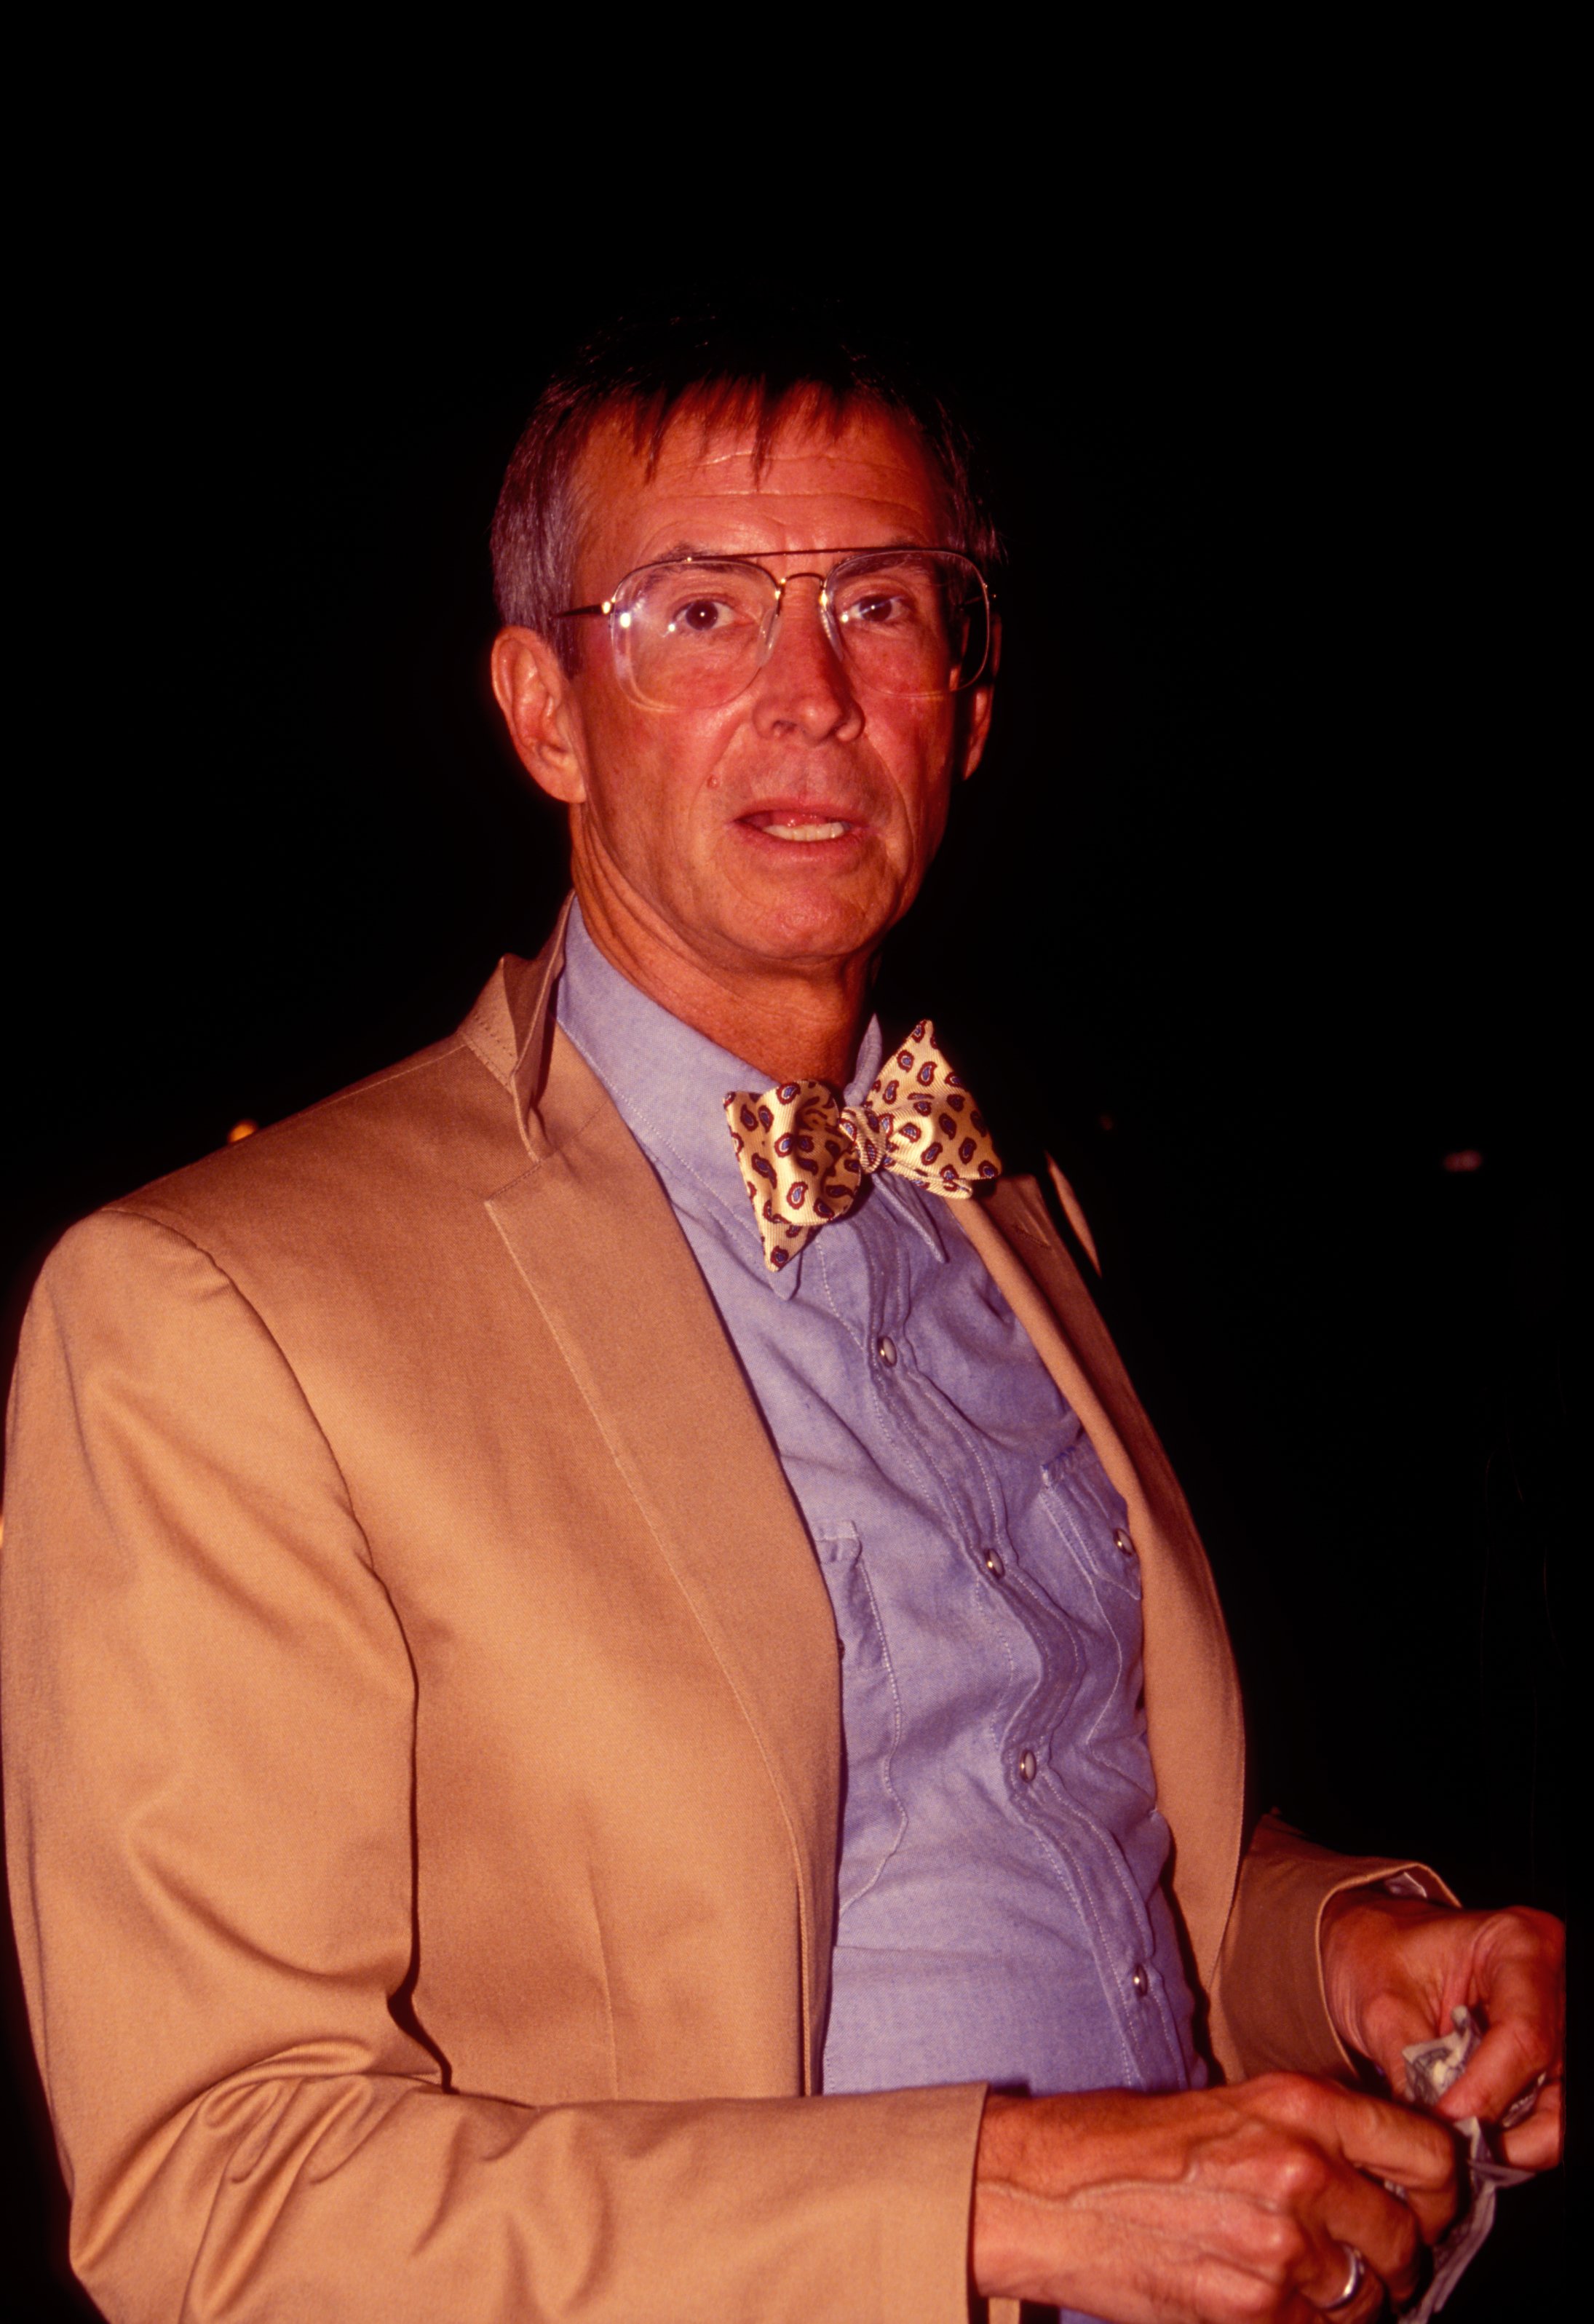 Actor Anthony Perkins leaves Spago restaurant in 1991 in Los Angeles | Photo: Shutterstock